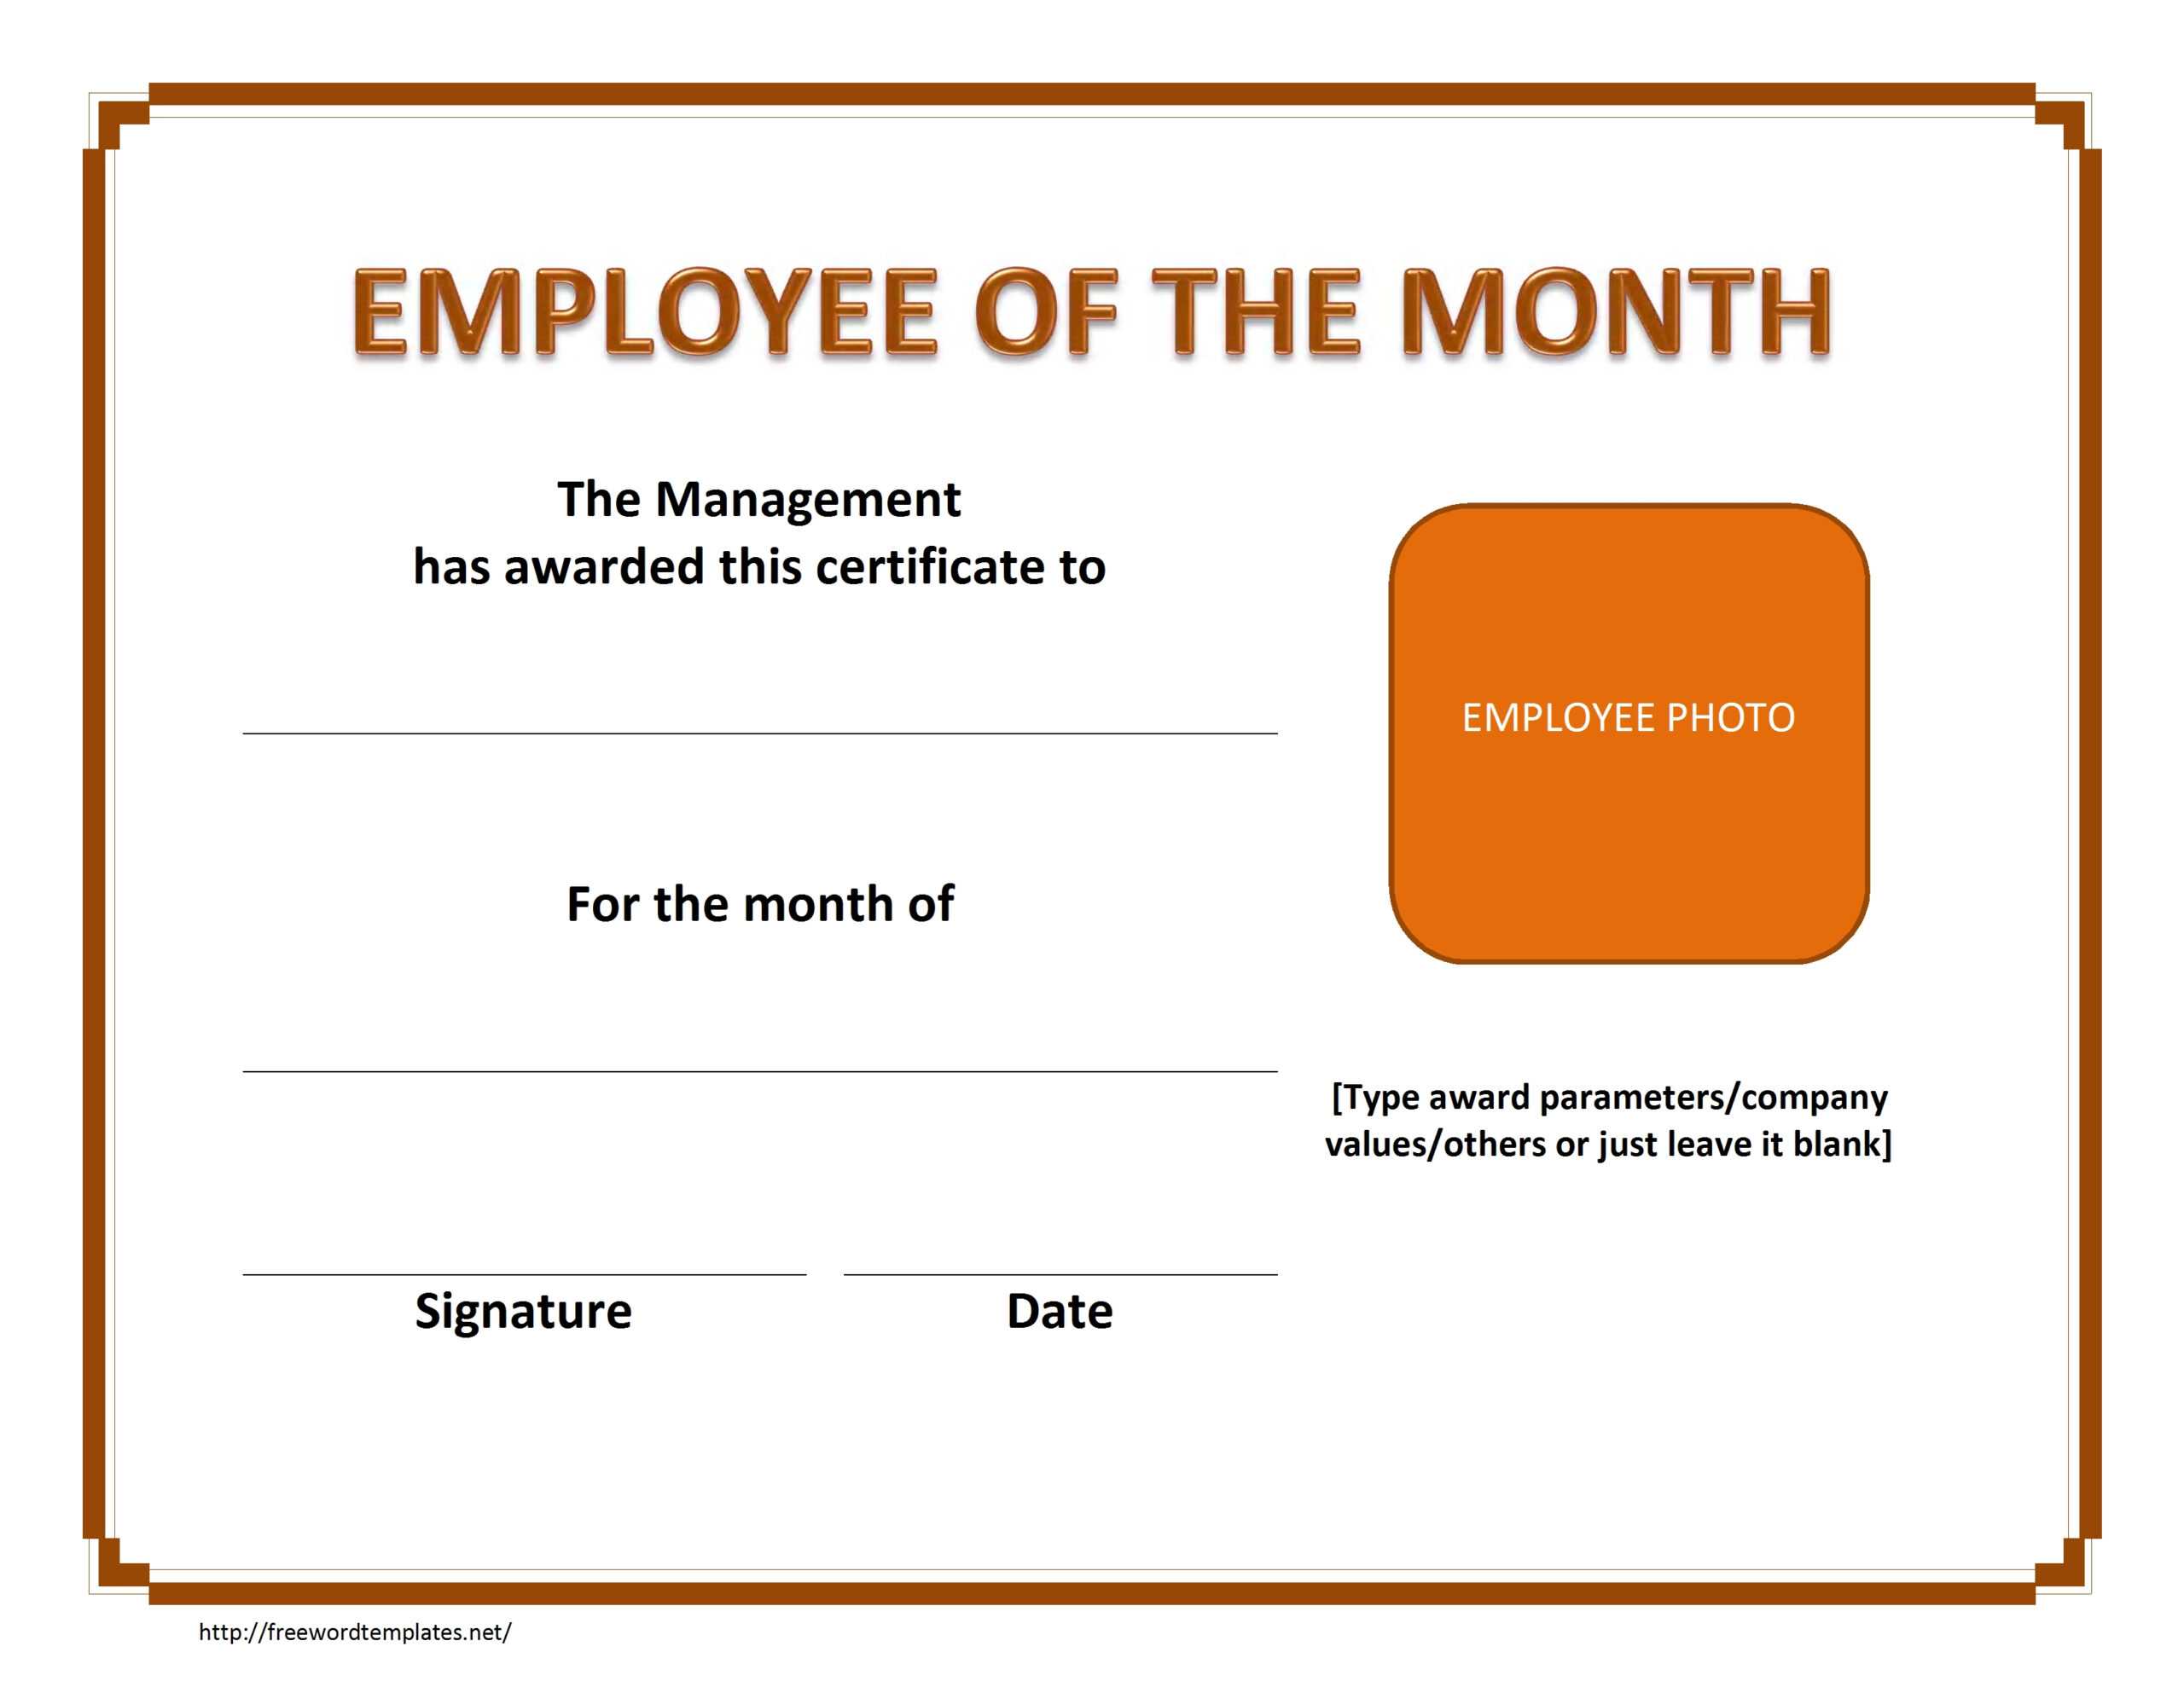 Employee Of The Month Template | E Commercewordpress Within Employee Of The Month Certificate Template With Picture